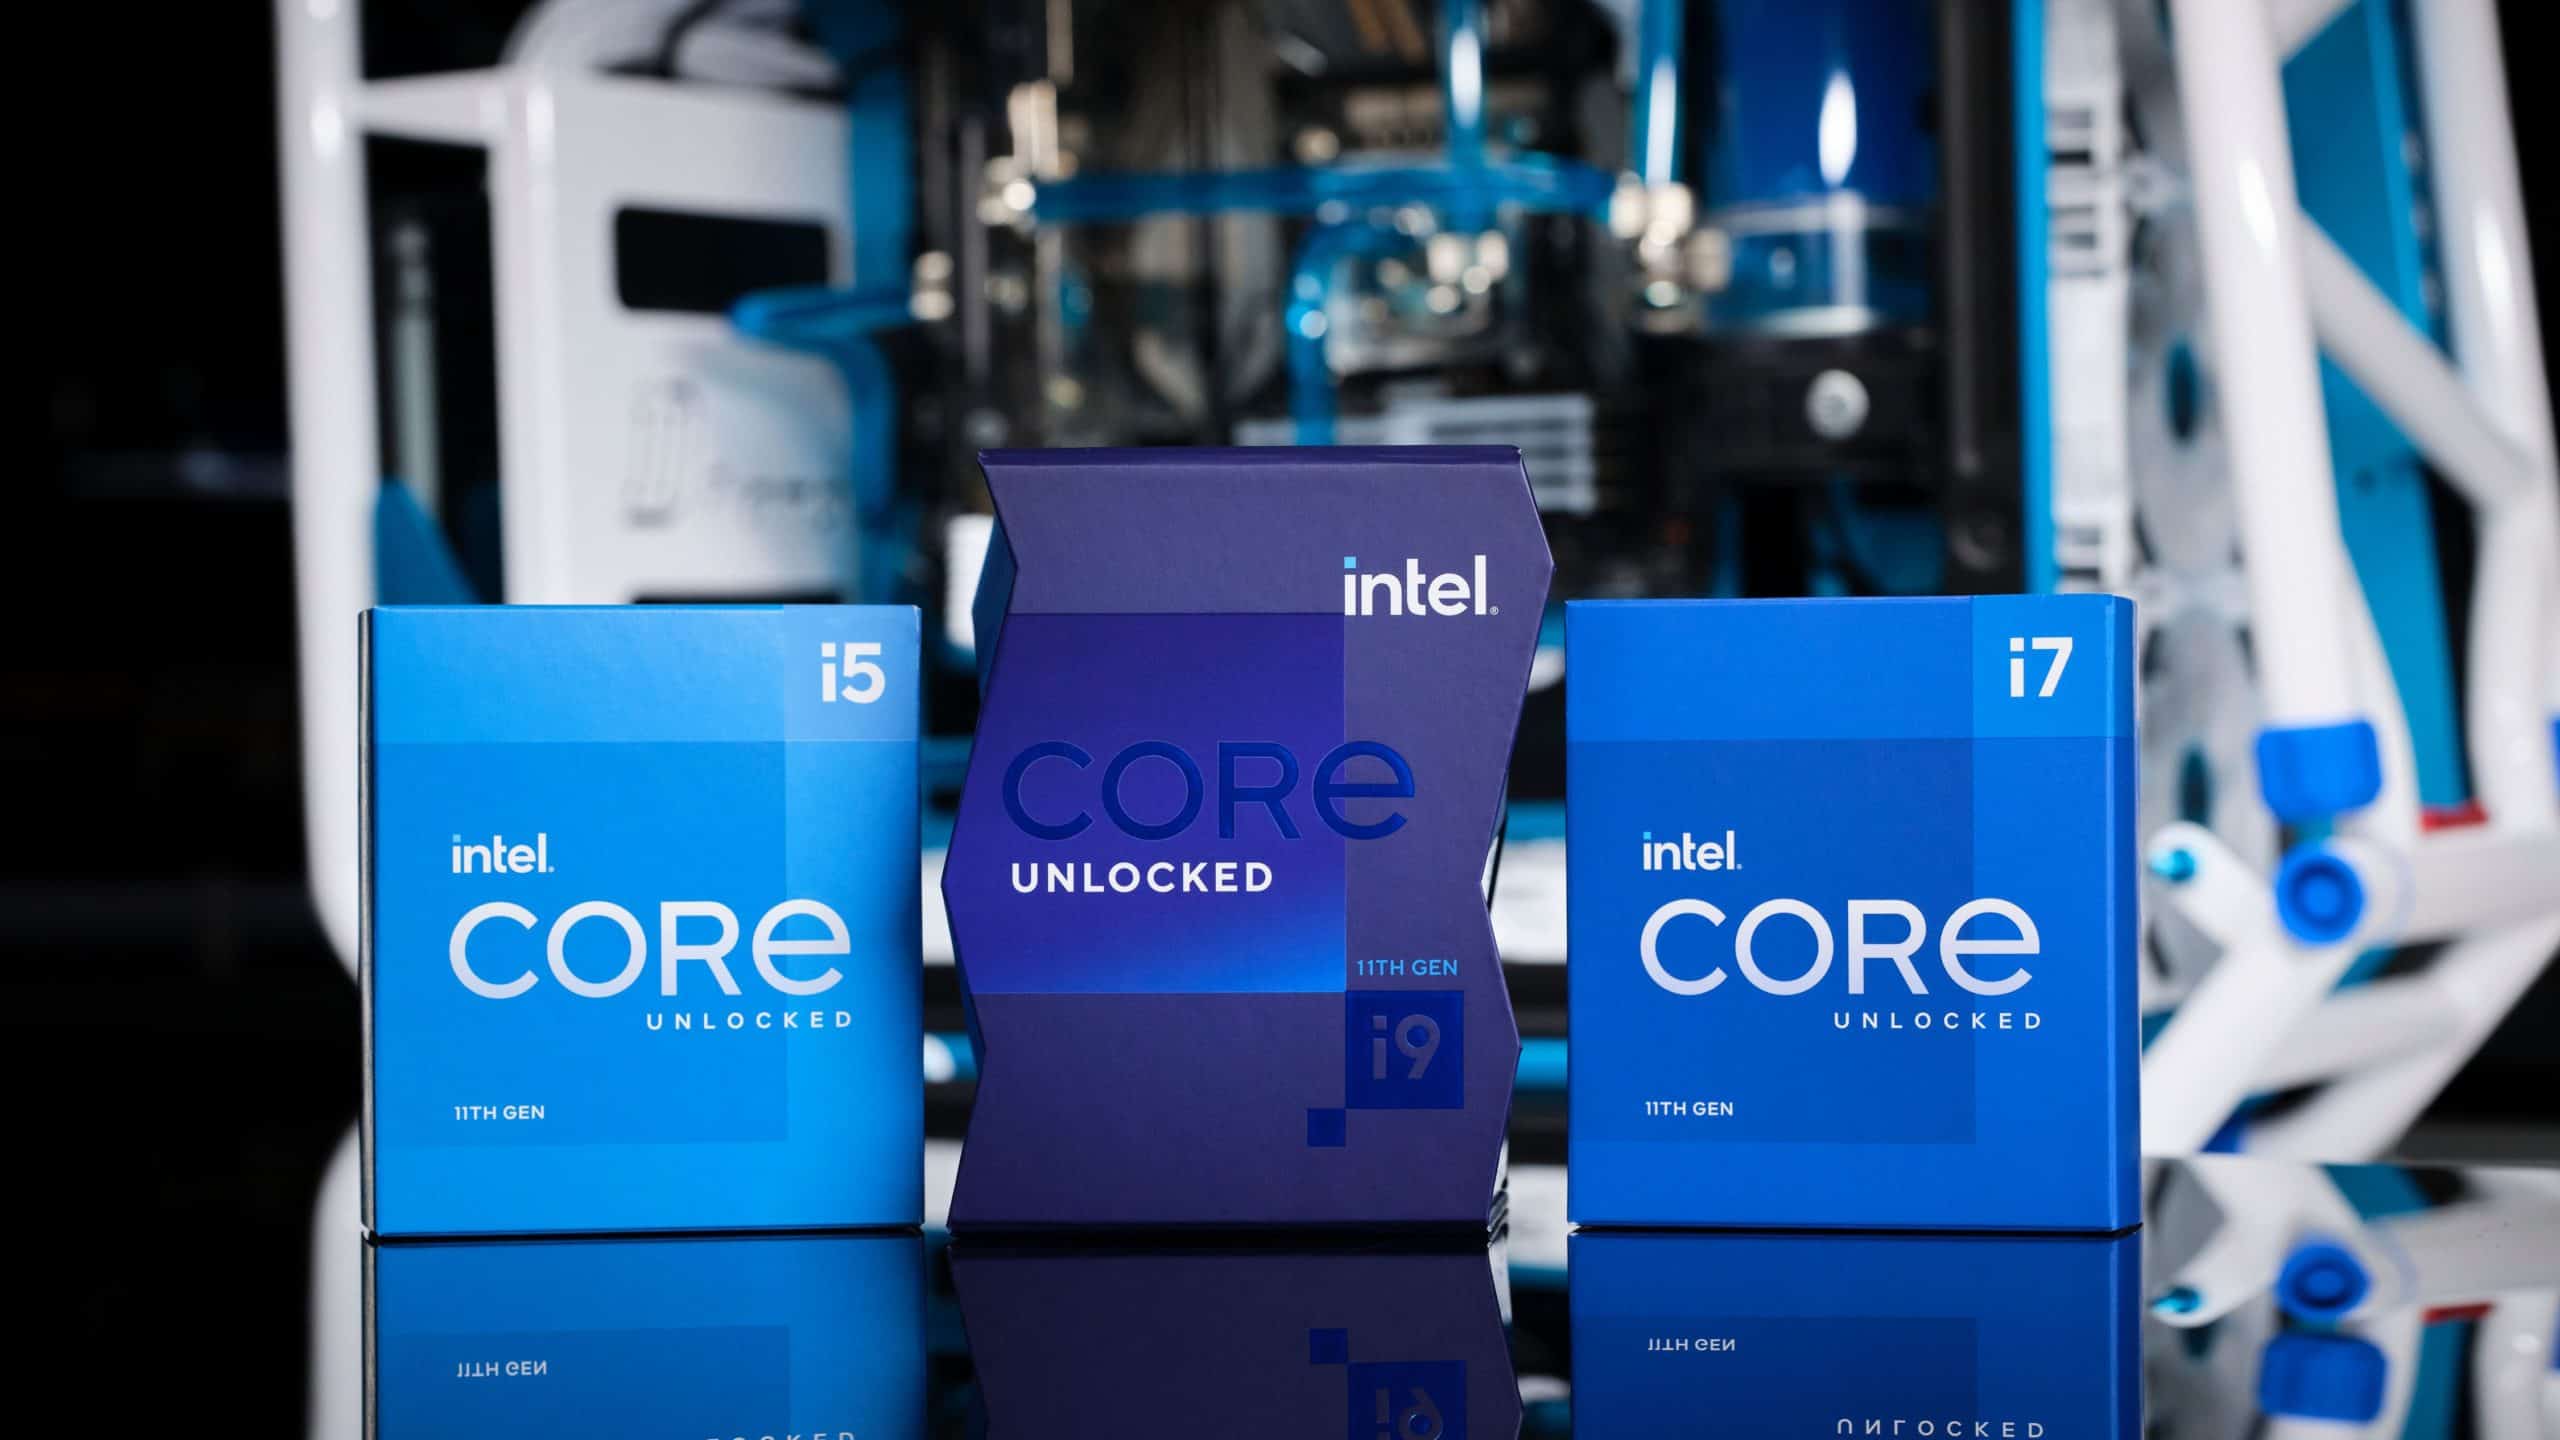 Intel announces the worldwide launch of the 11th Generation of Intel Core processors